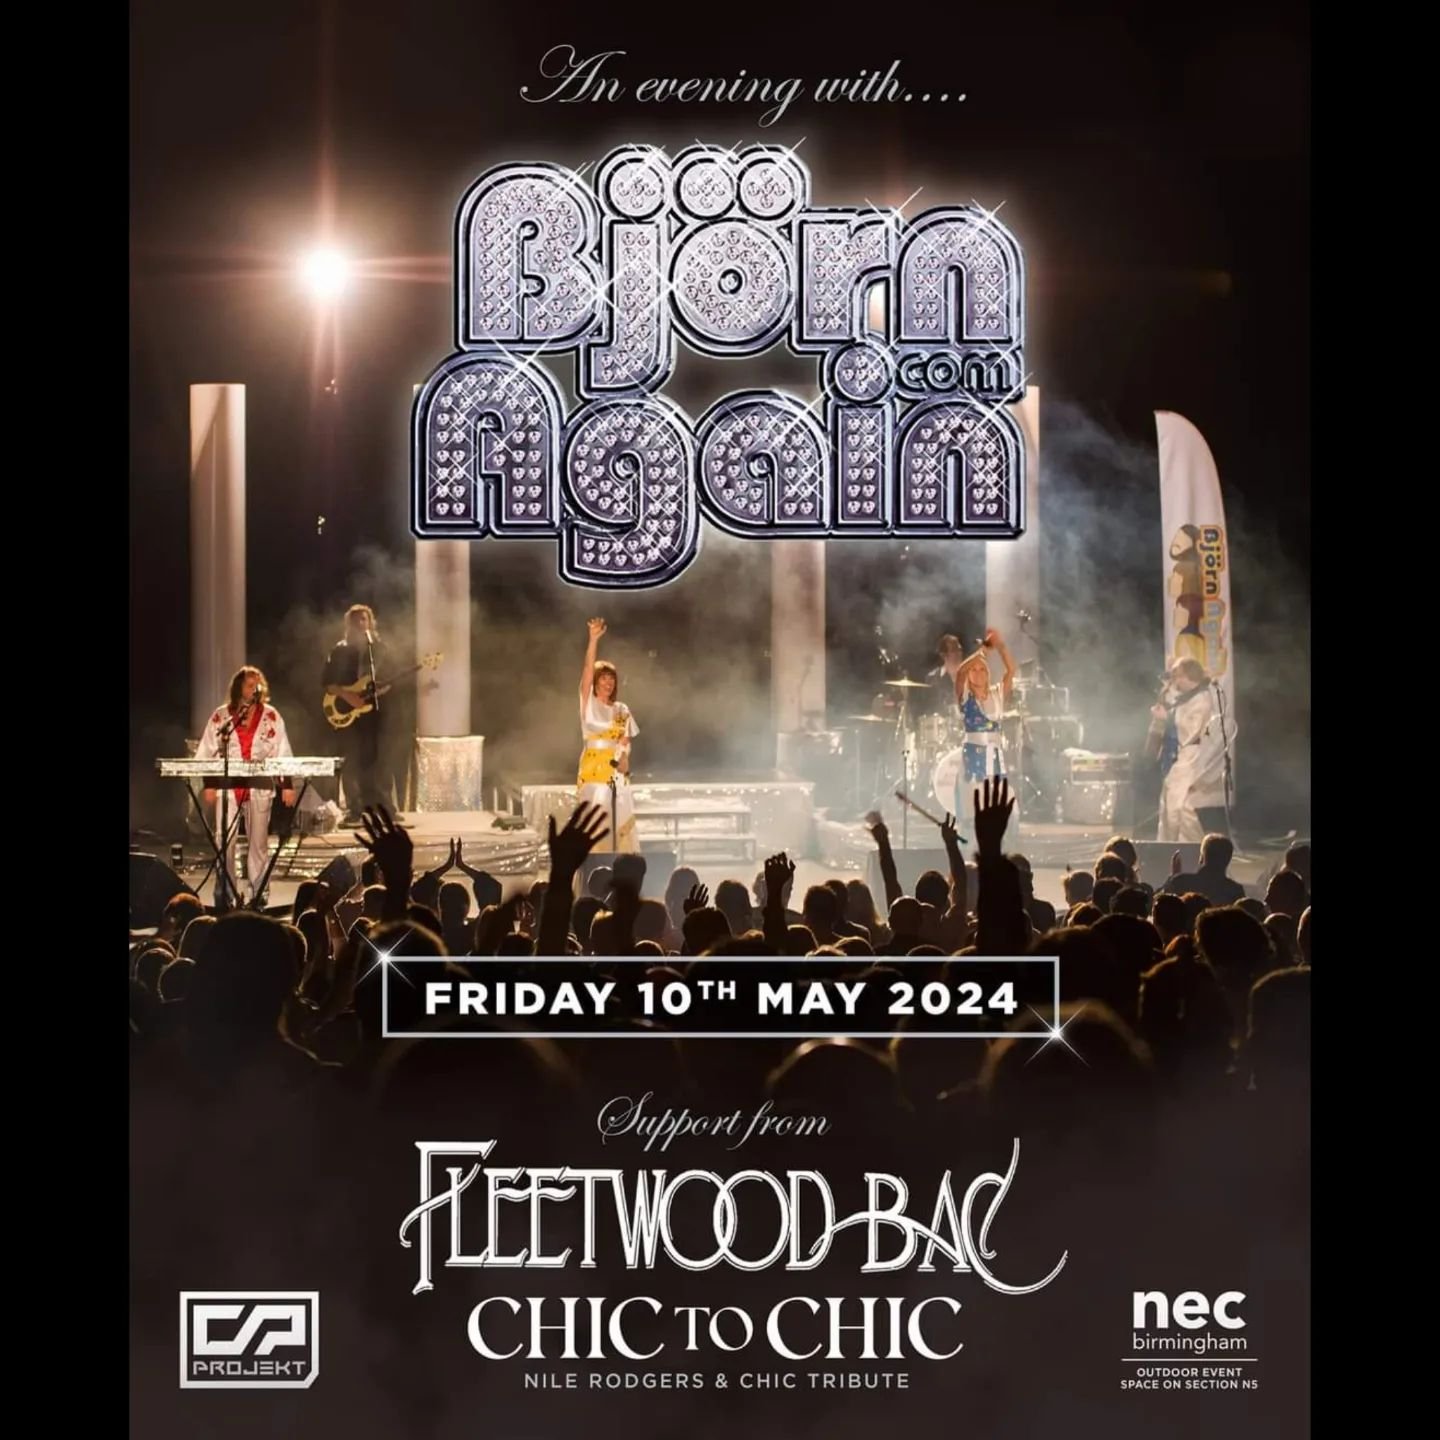 A little over two weeks until we play with the amazing @bjornagainofficial and our good friends @fleetwoodbactribute  at the @necbirmingham  Tickets are still available here 👇🏻👇🏻

https://www.thenec.co.uk/whats-on/bjorn-again/

Courtesy of James 